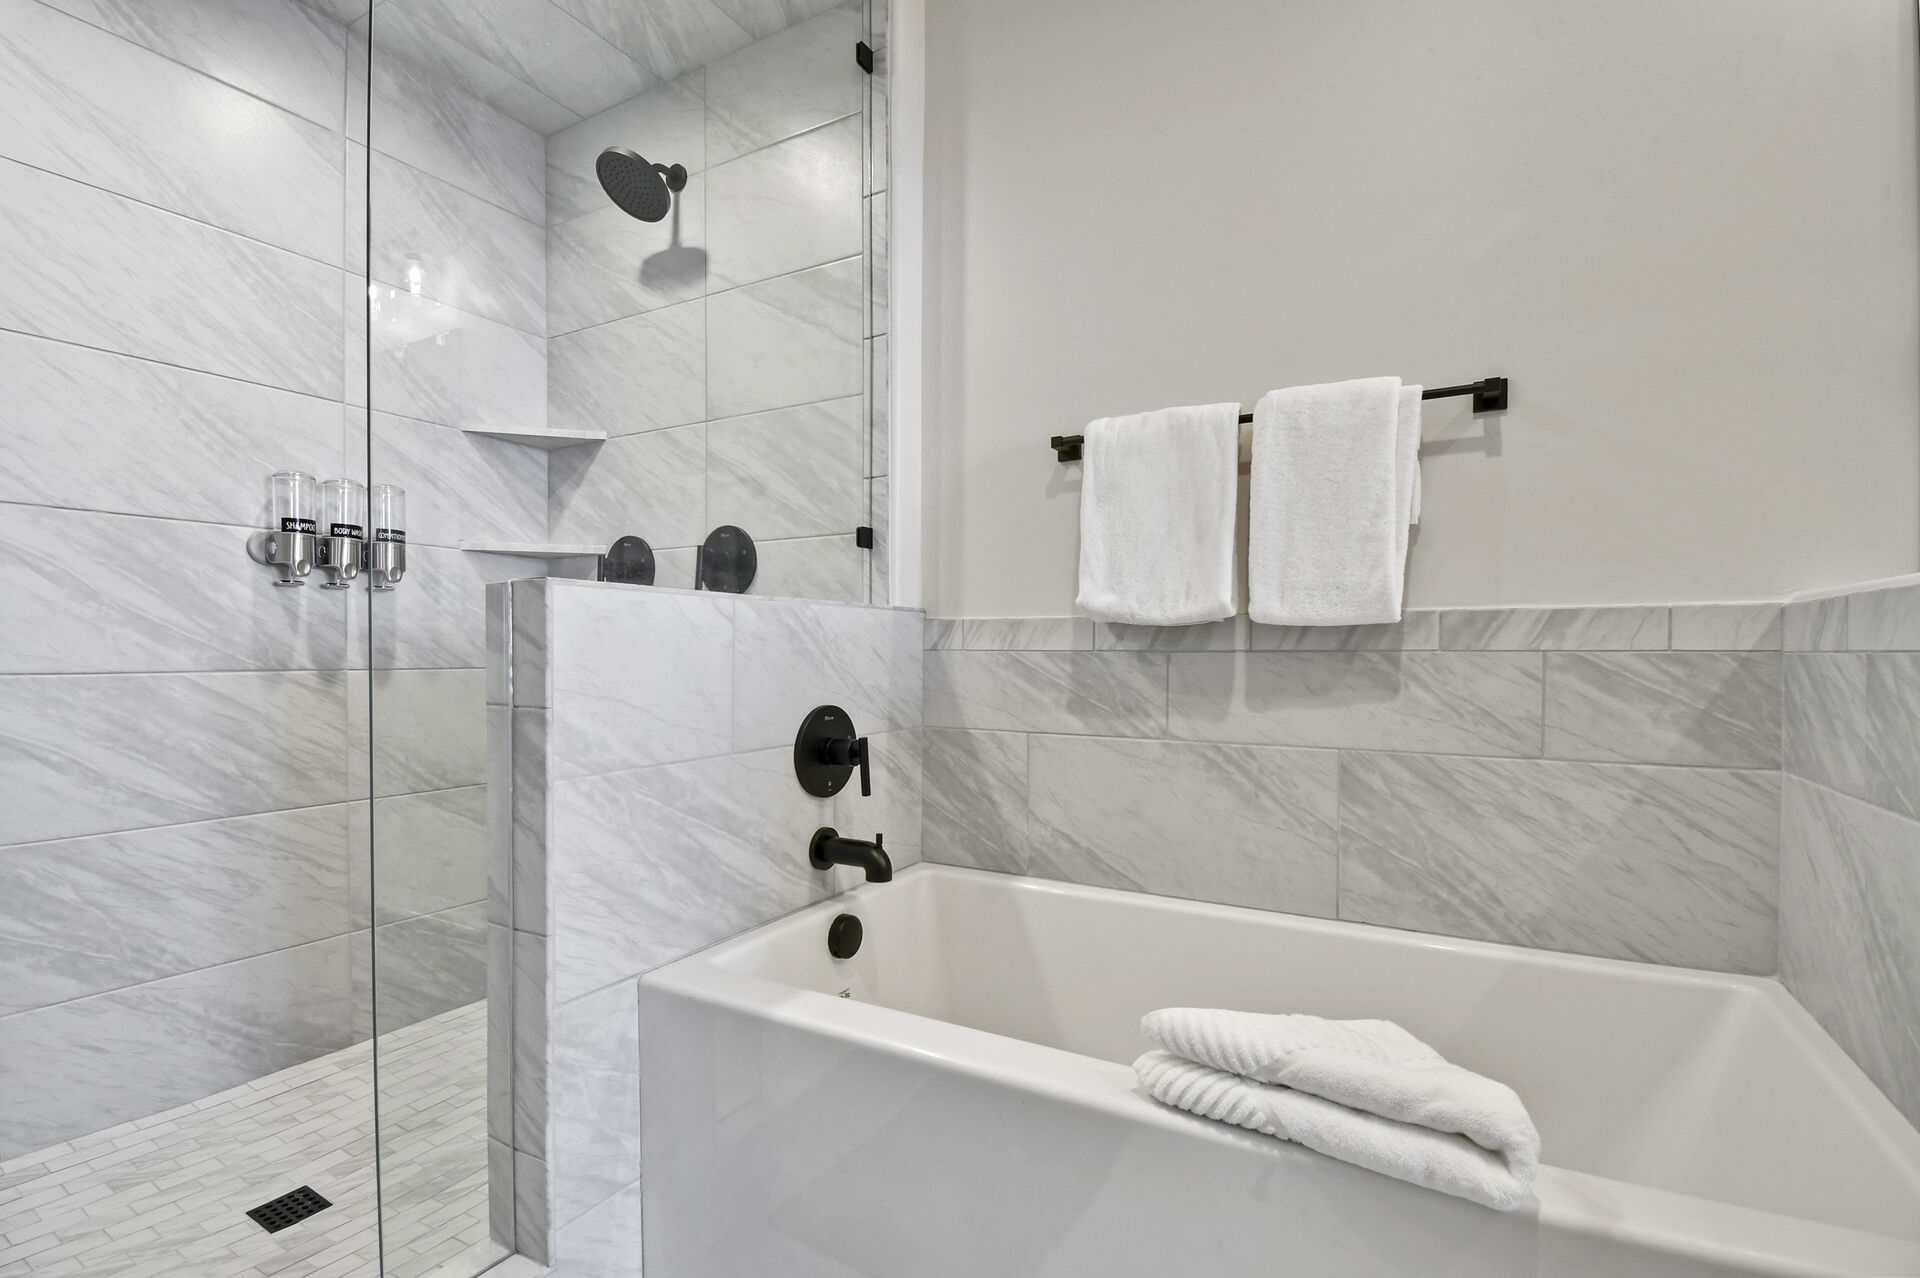 Separate tub and shower